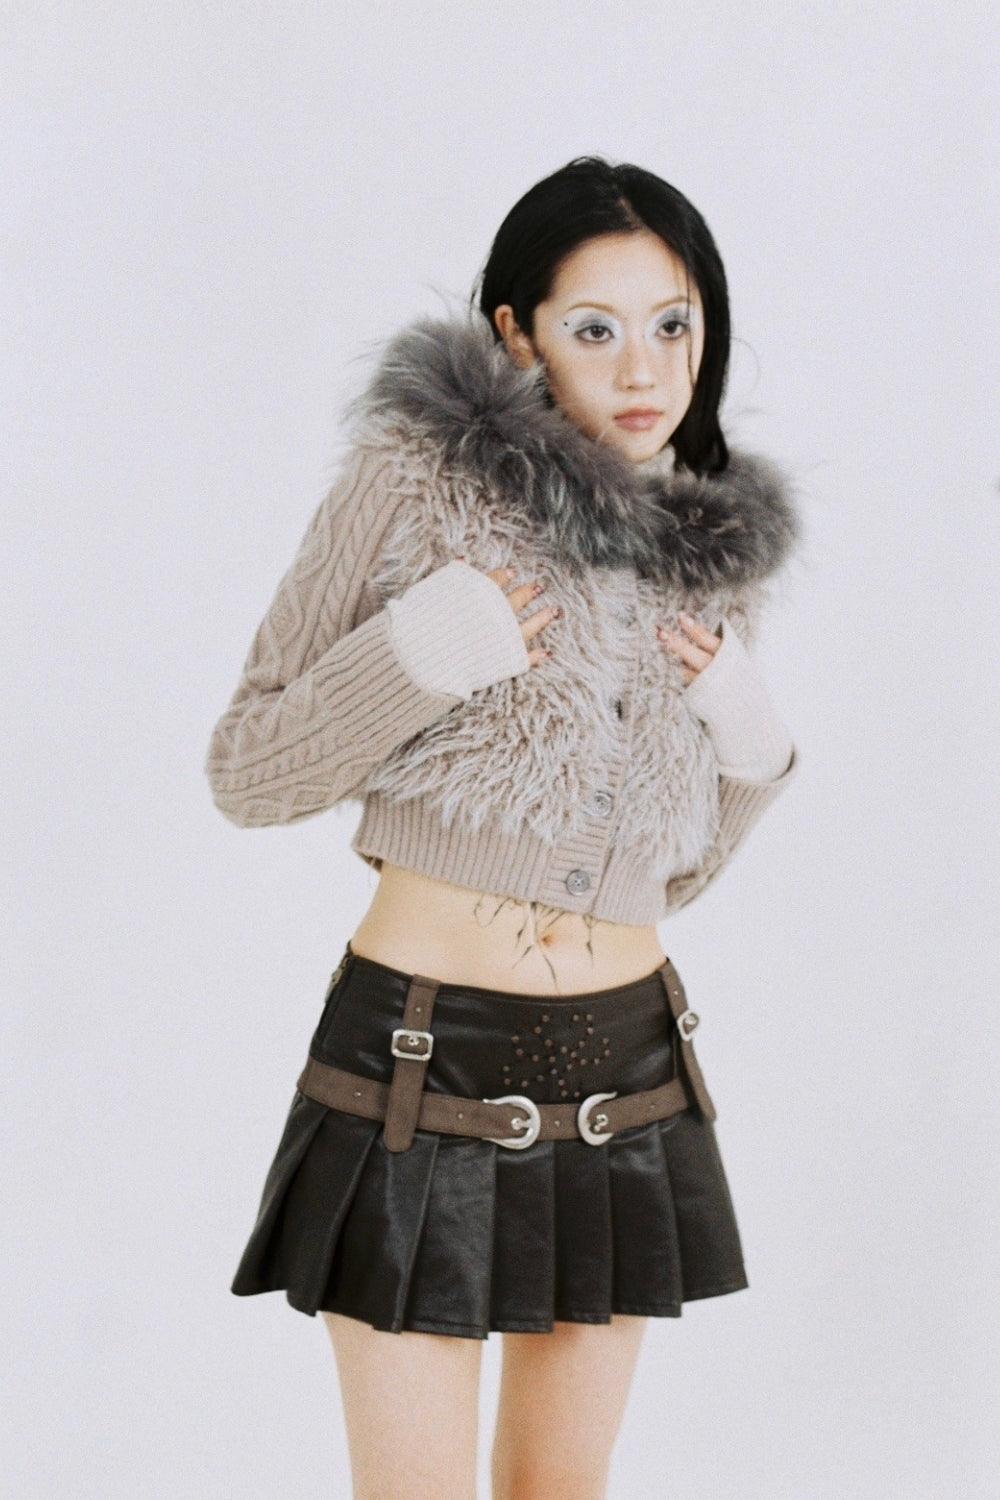 Y2K Clothing | Pixie Rebels' range of Chinese 2000s Fashion Brands